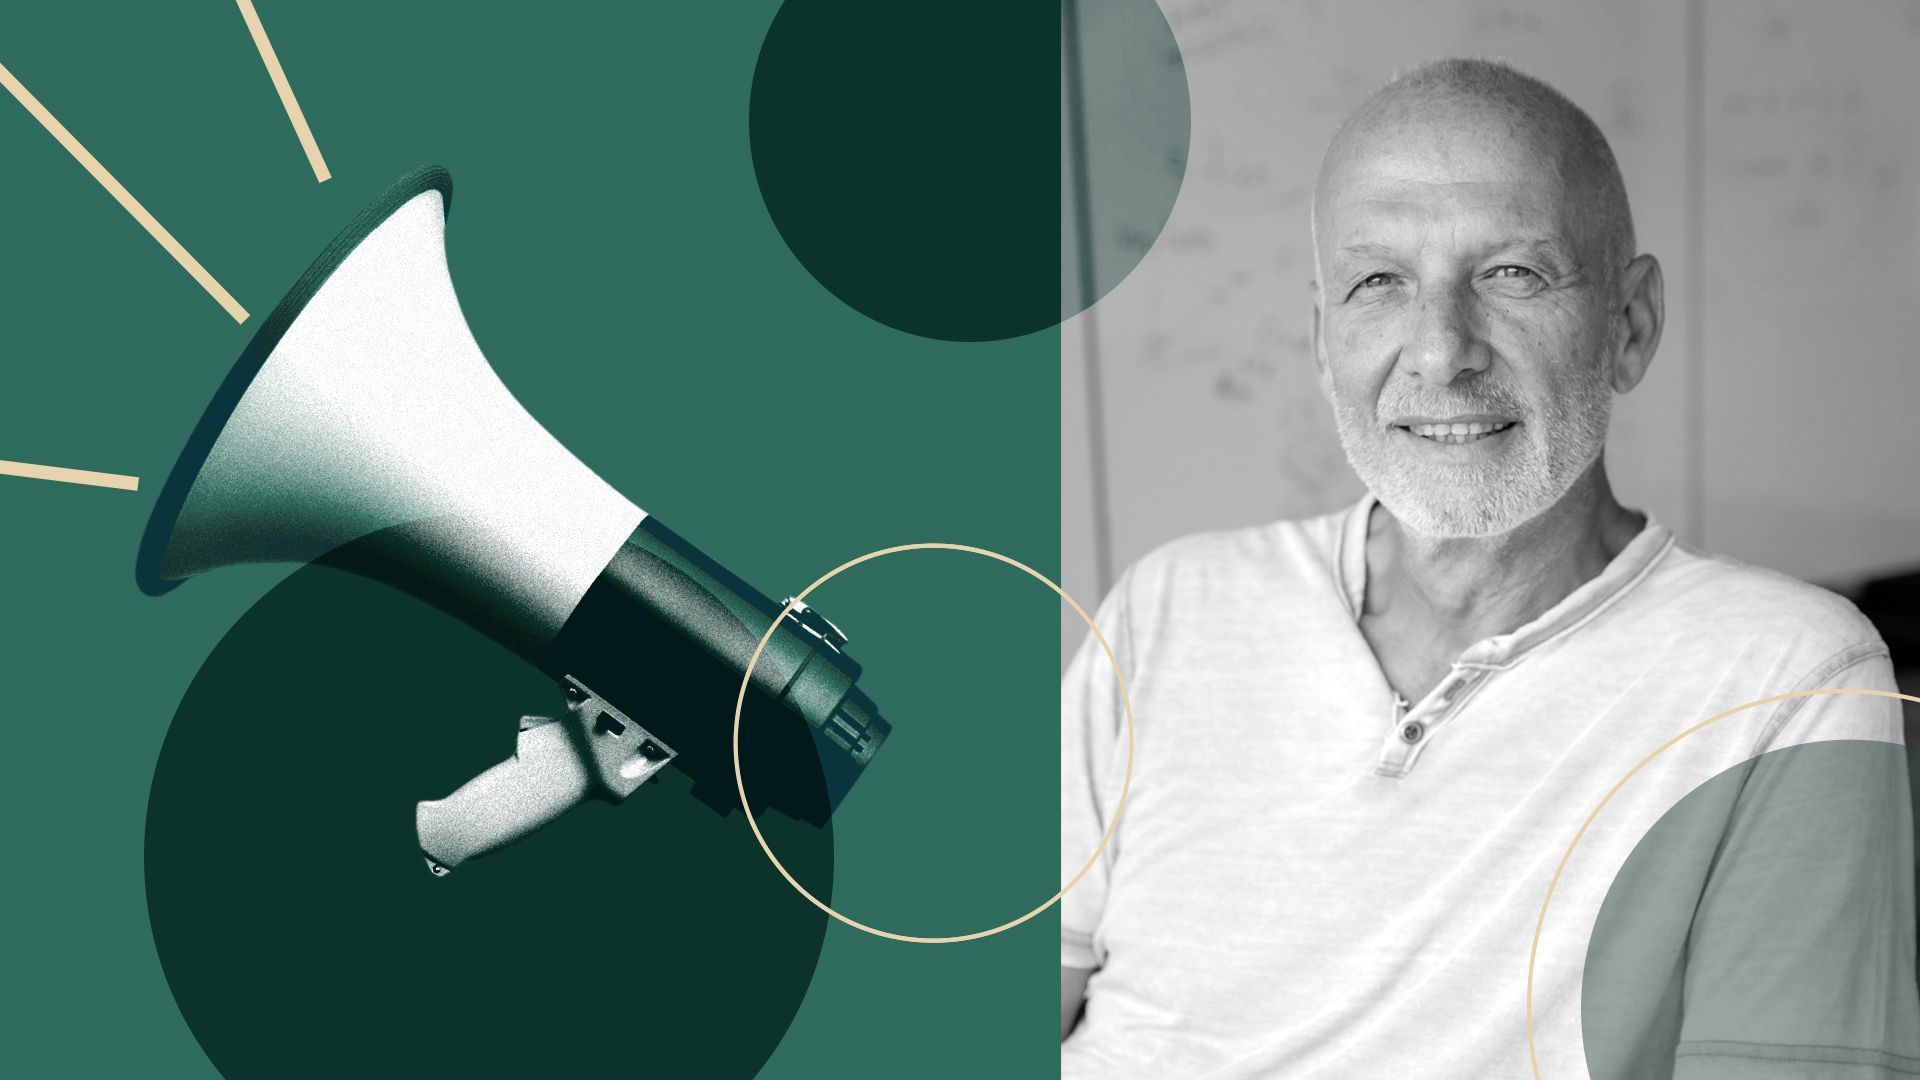 Photo illustration of Doron Gerstel, CEO of Perion Network, with a megaphone and circles in the background.